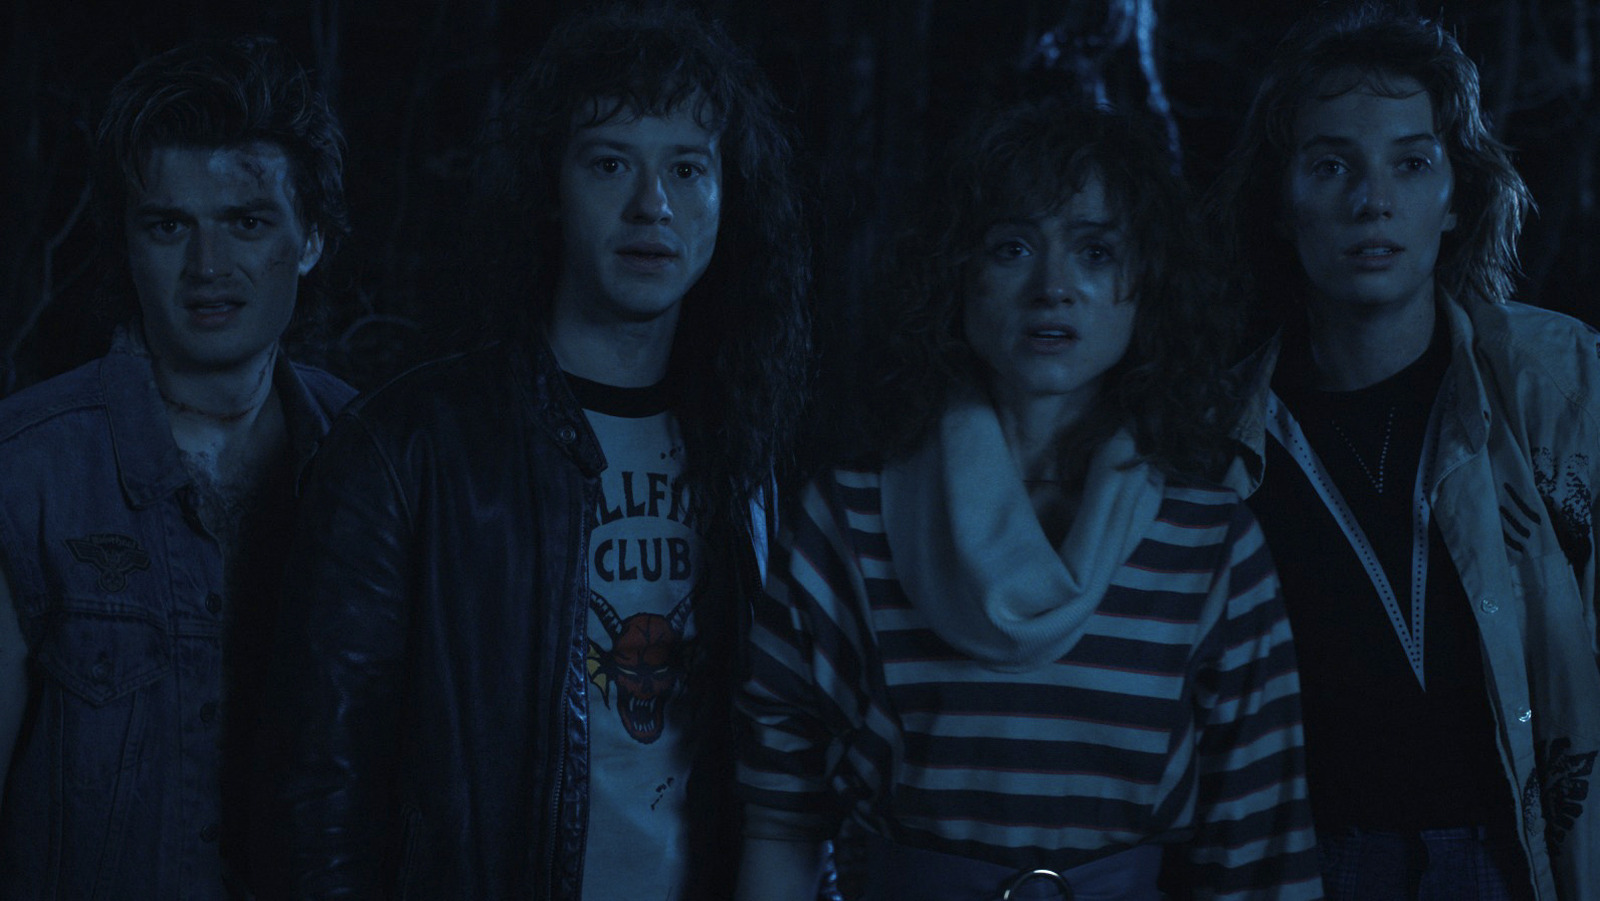 Stranger Things season 4 pictures reveal new look at Volume 2